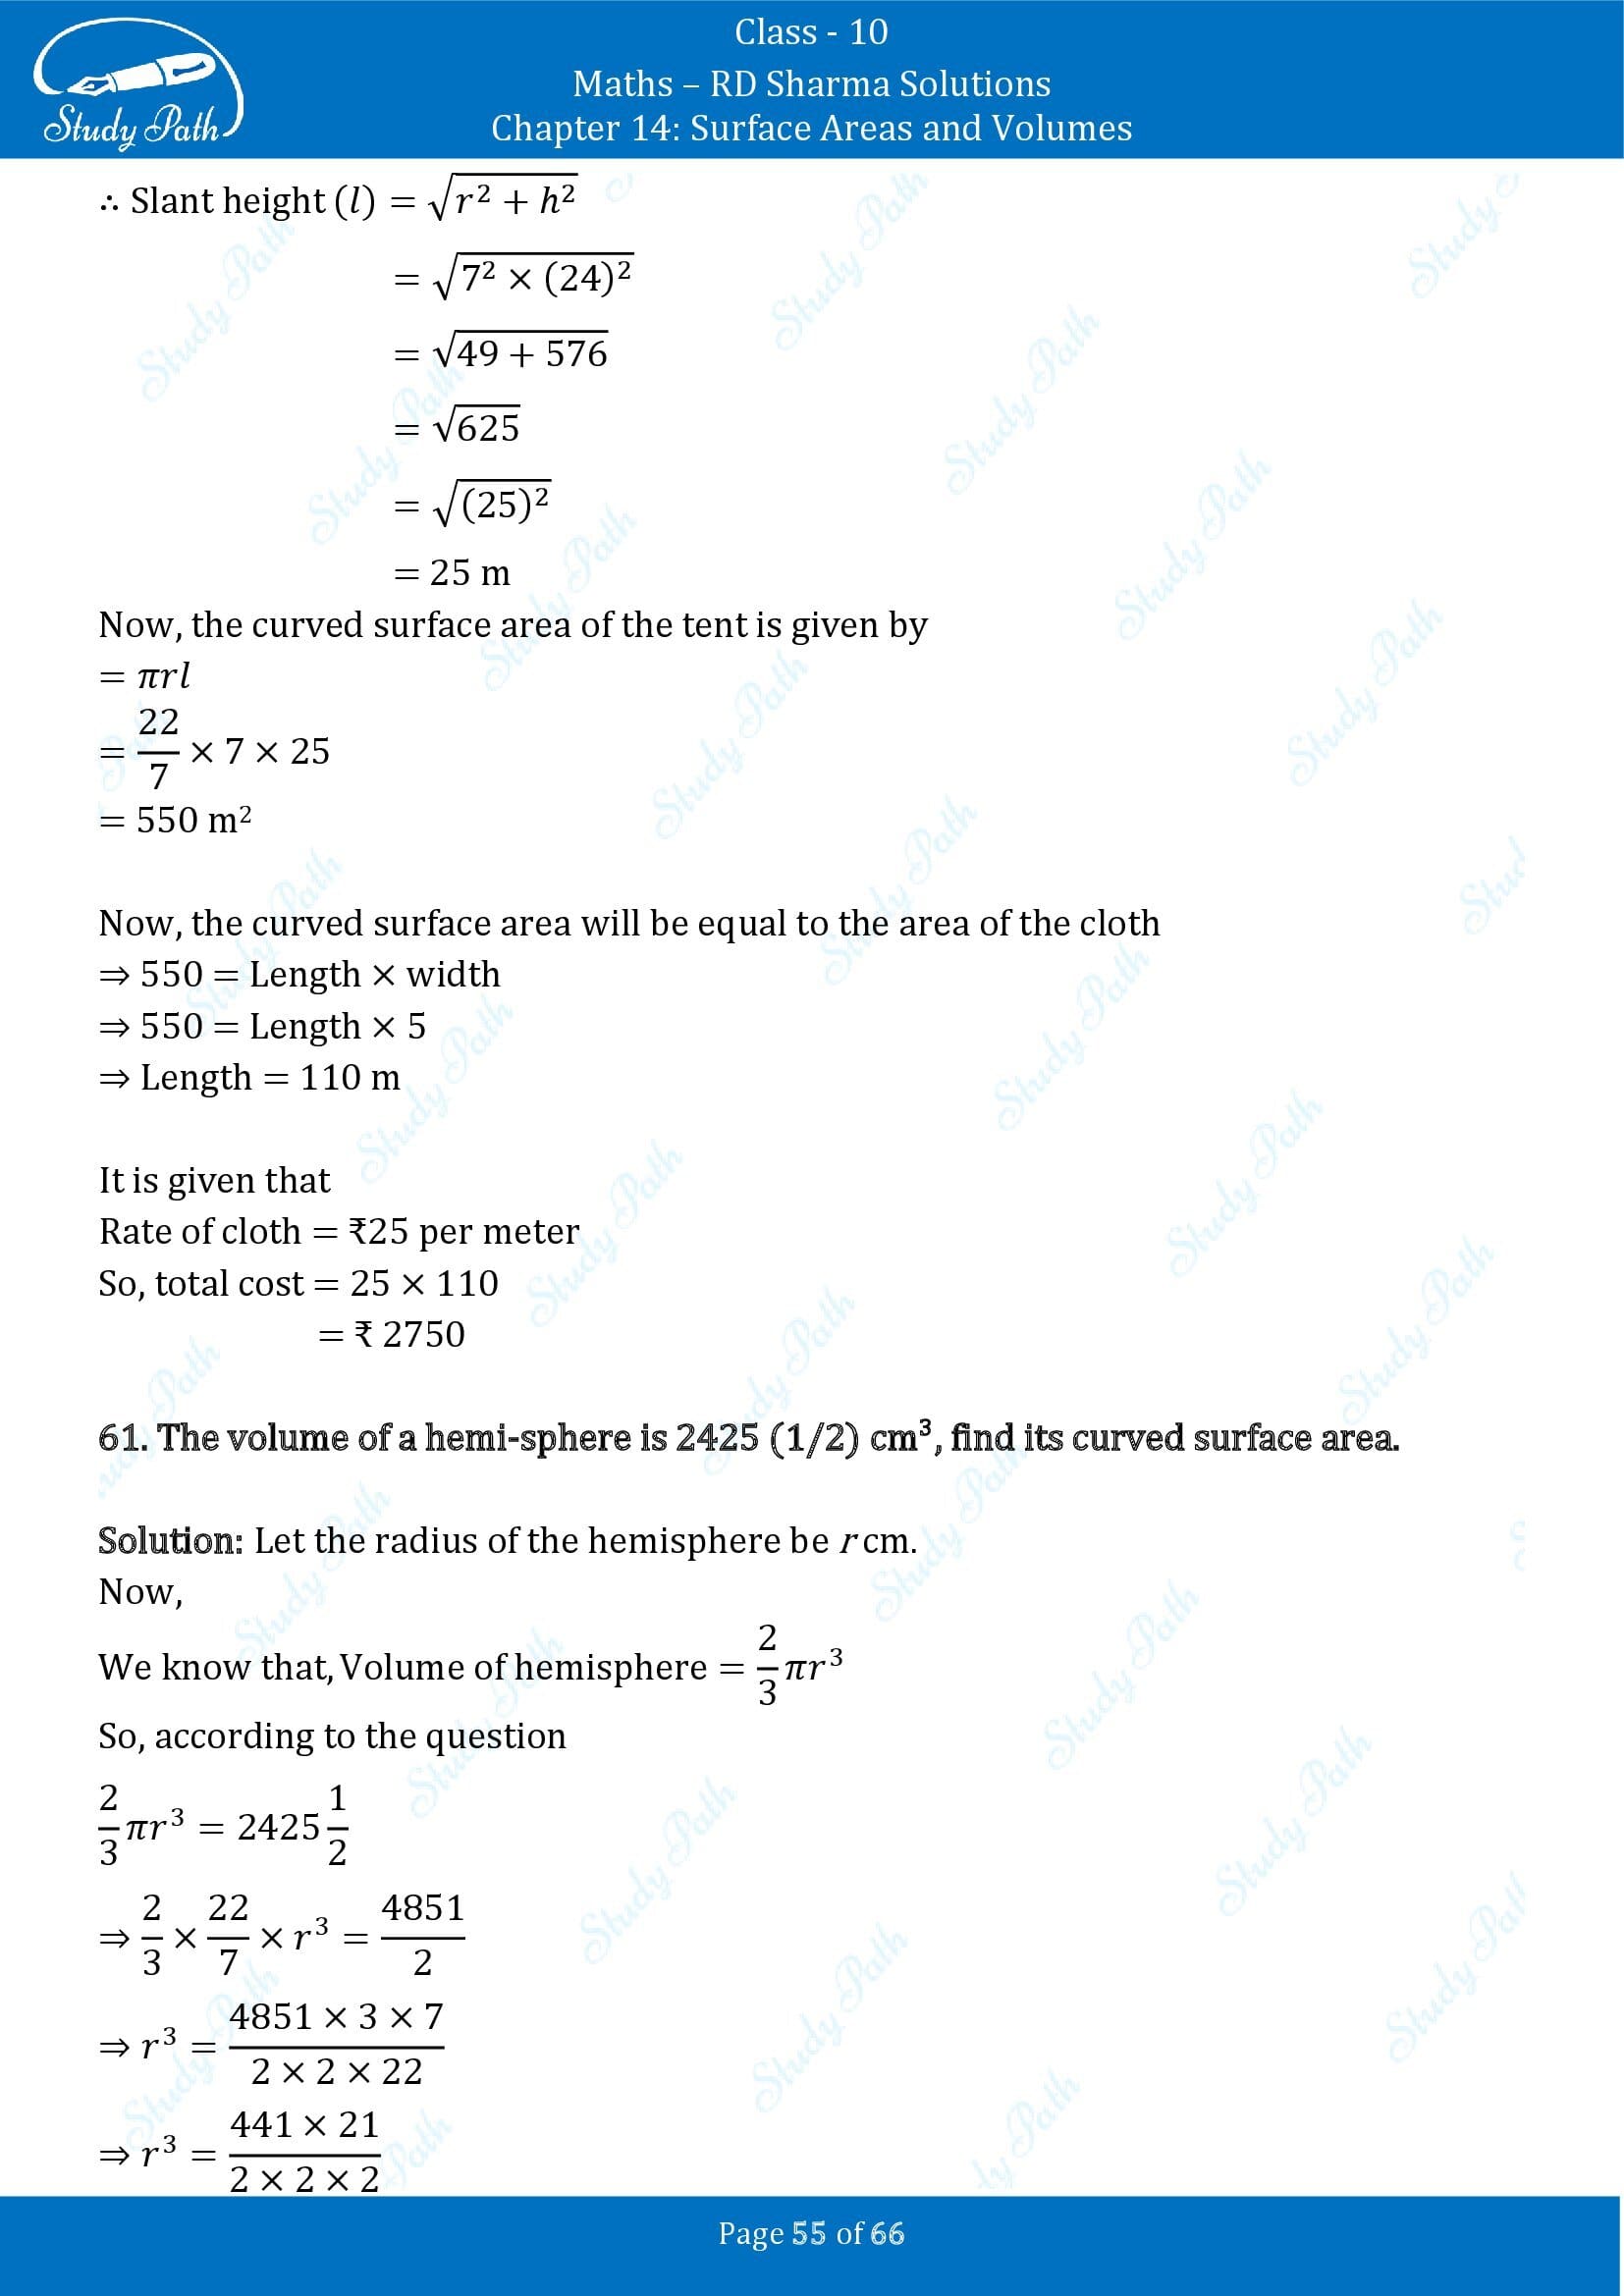 RD Sharma Solutions Class 10 Chapter 14 Surface Areas and Volumes Exercise 14.1 00055